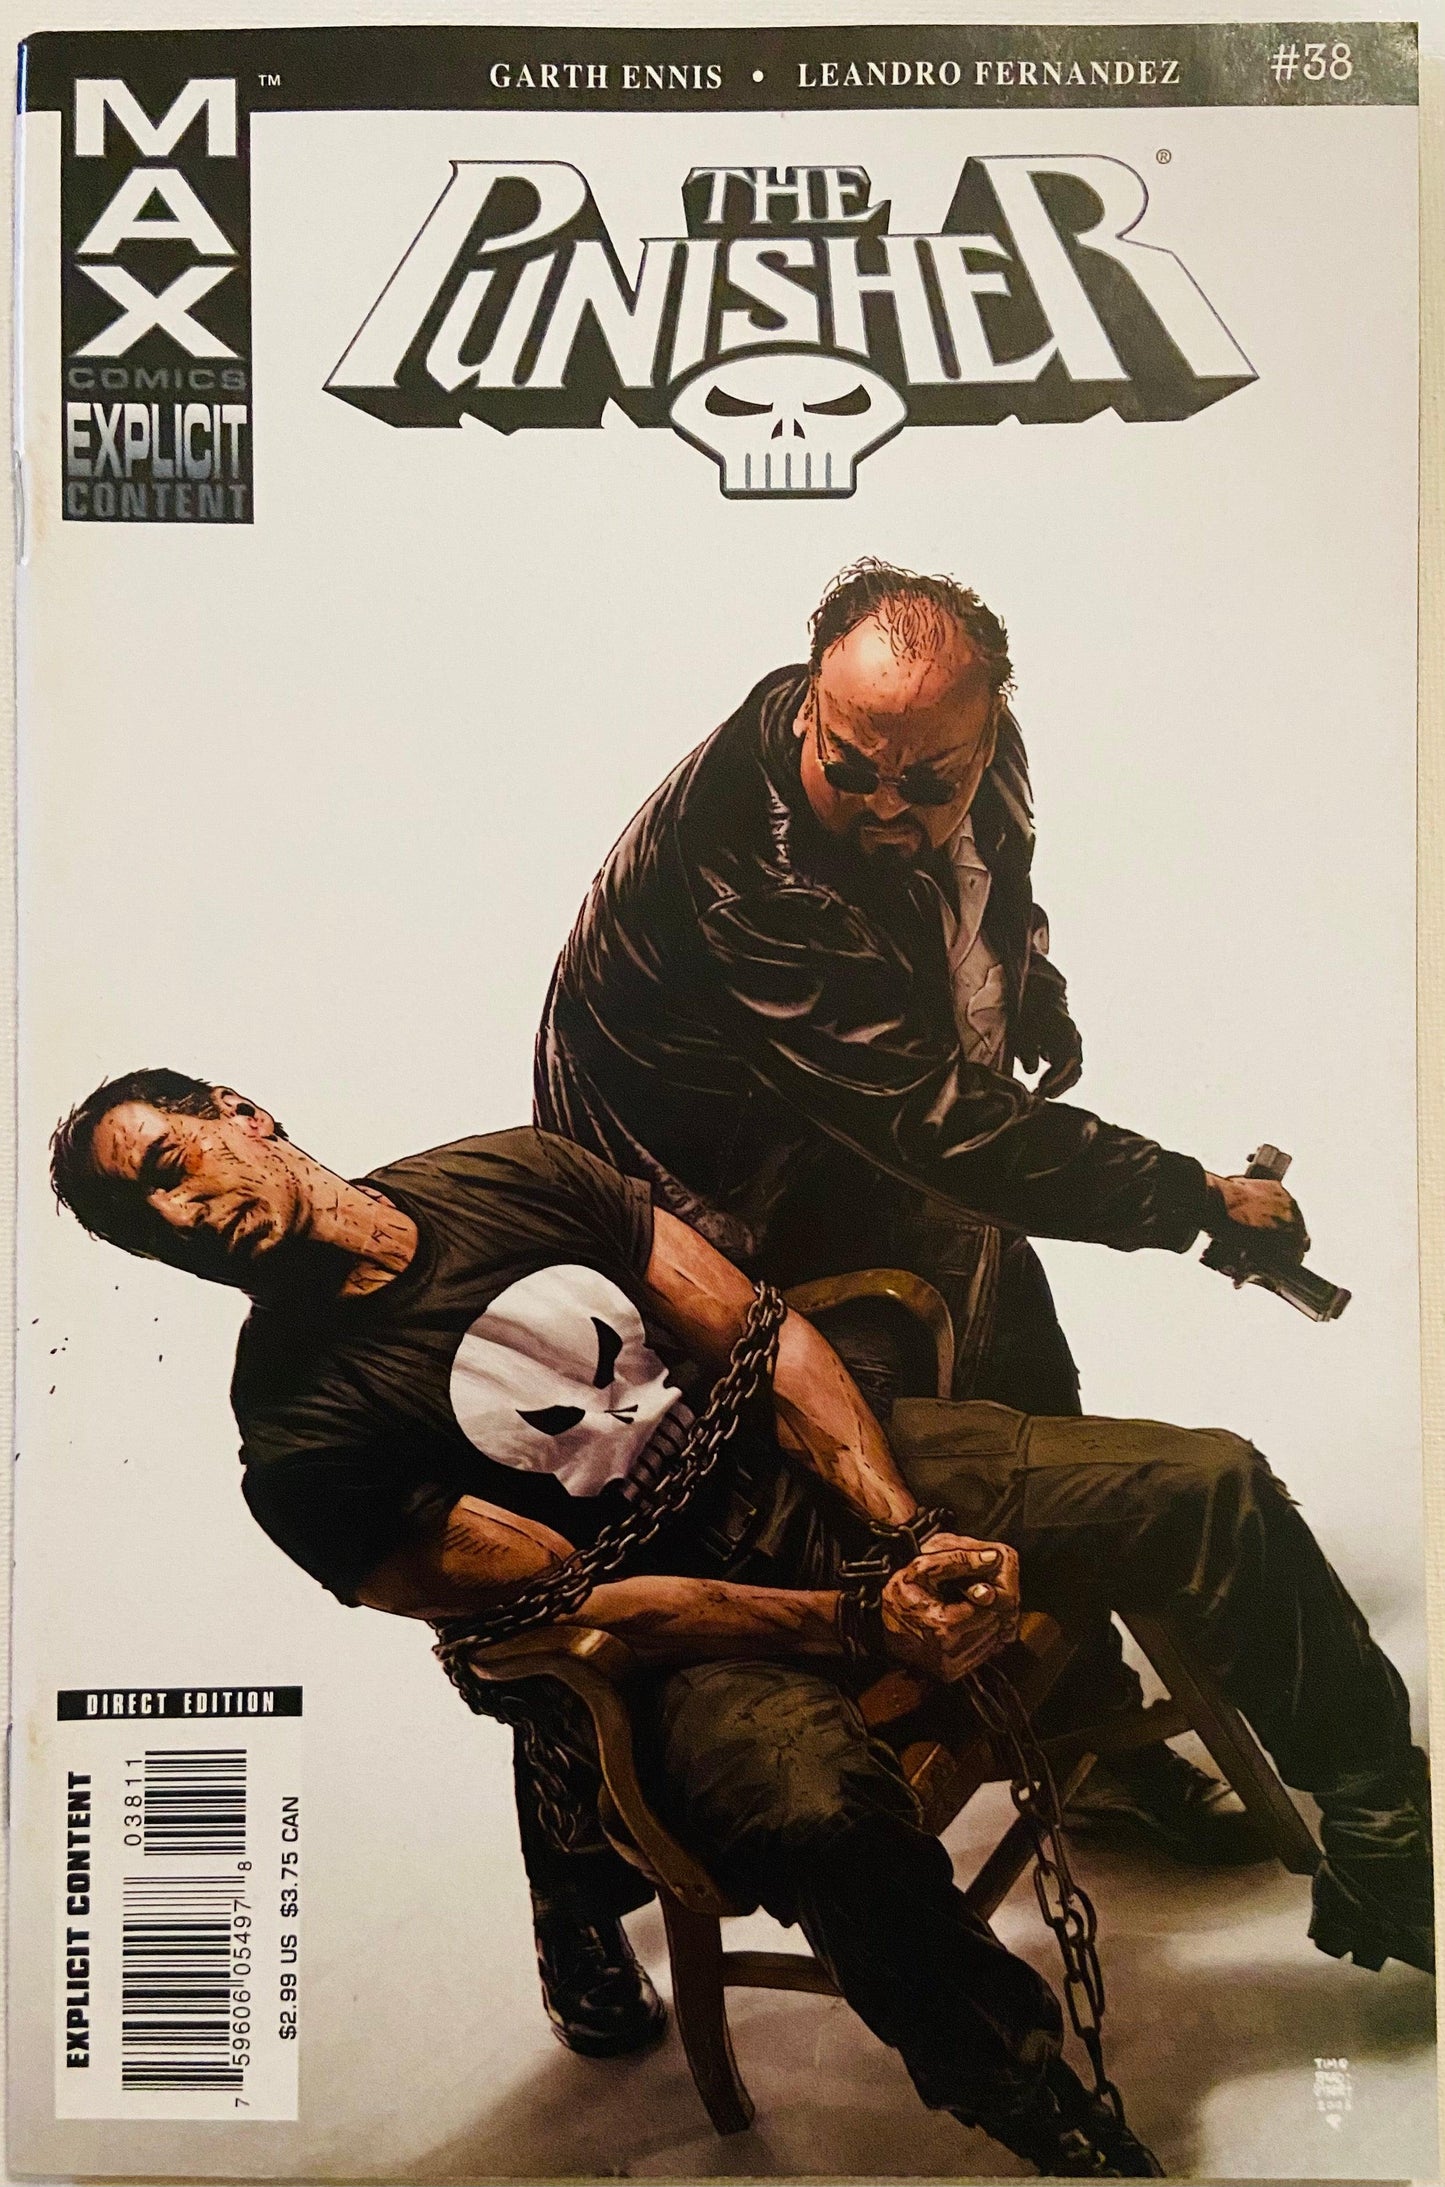 The Punisher #38 - HolyGrail Comix